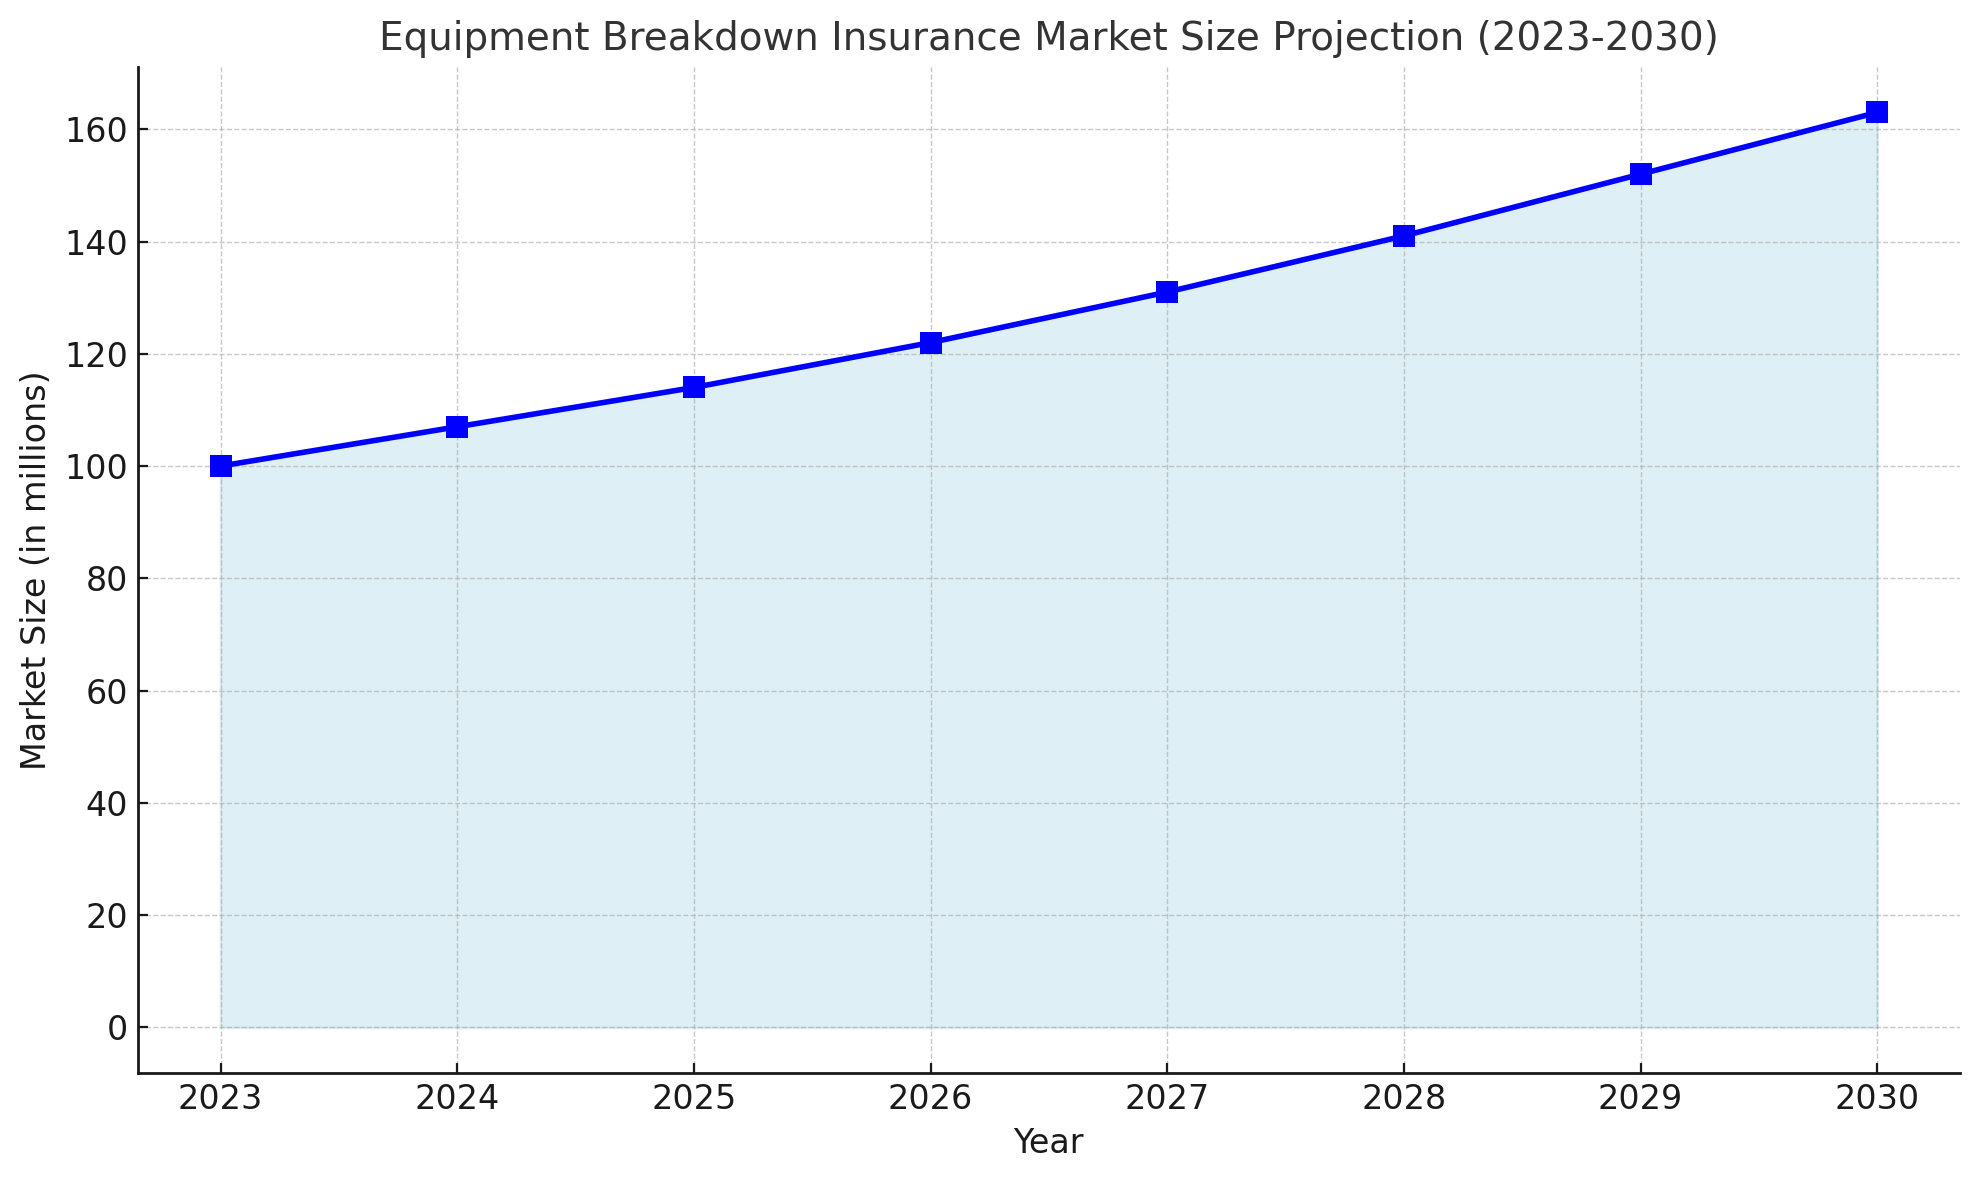 Line Graph of the Equipment Breakdown Insurance Market Size Projection from 2023 2030